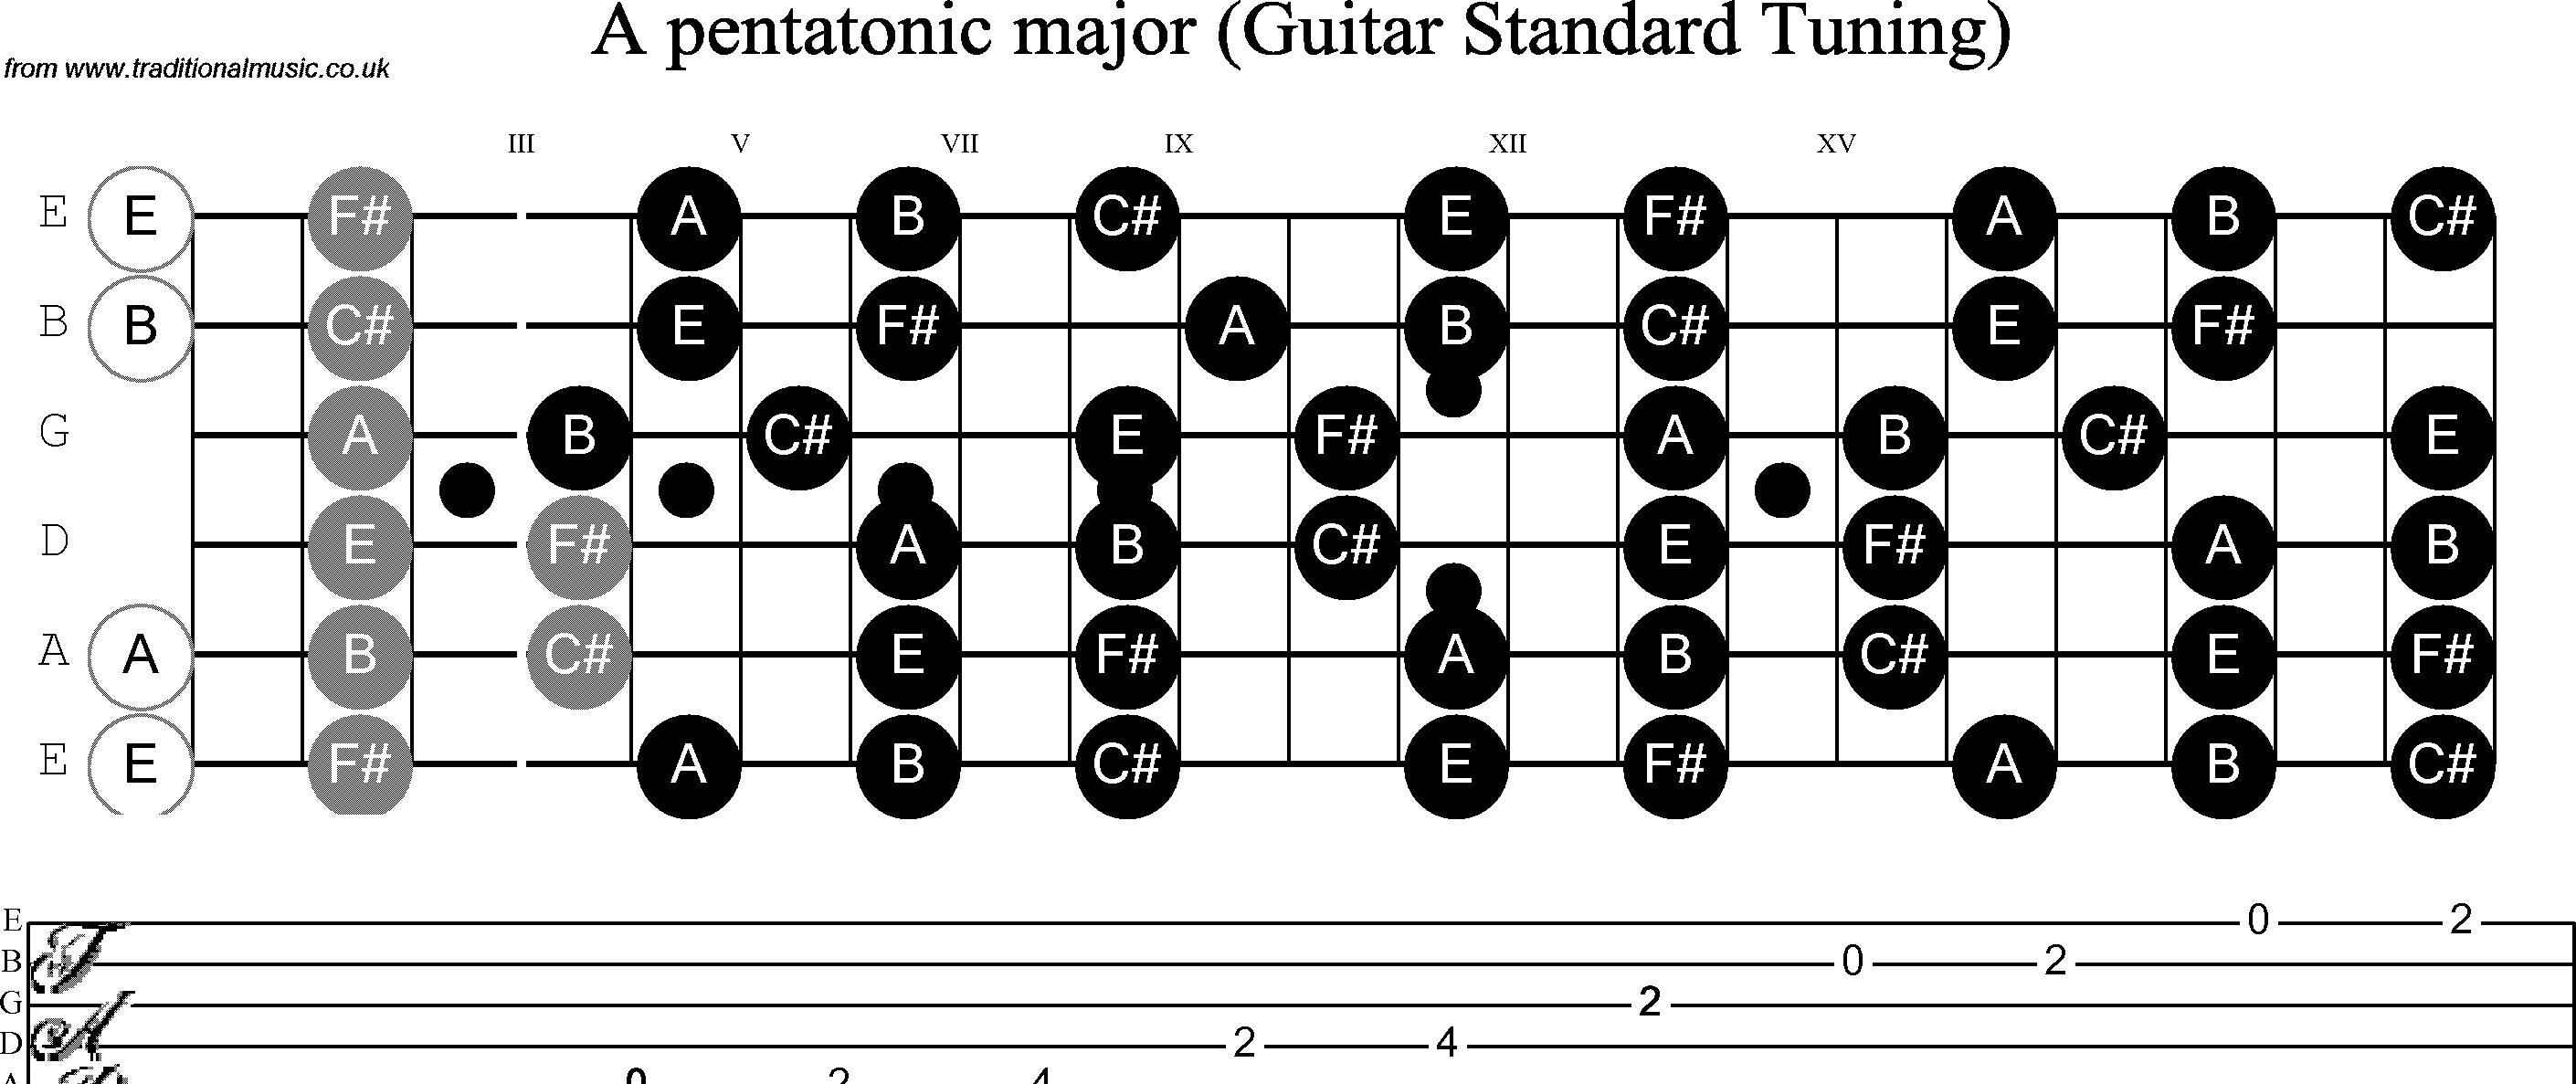 Scale, stave and neck diagram for Guitar: A Pentatonic